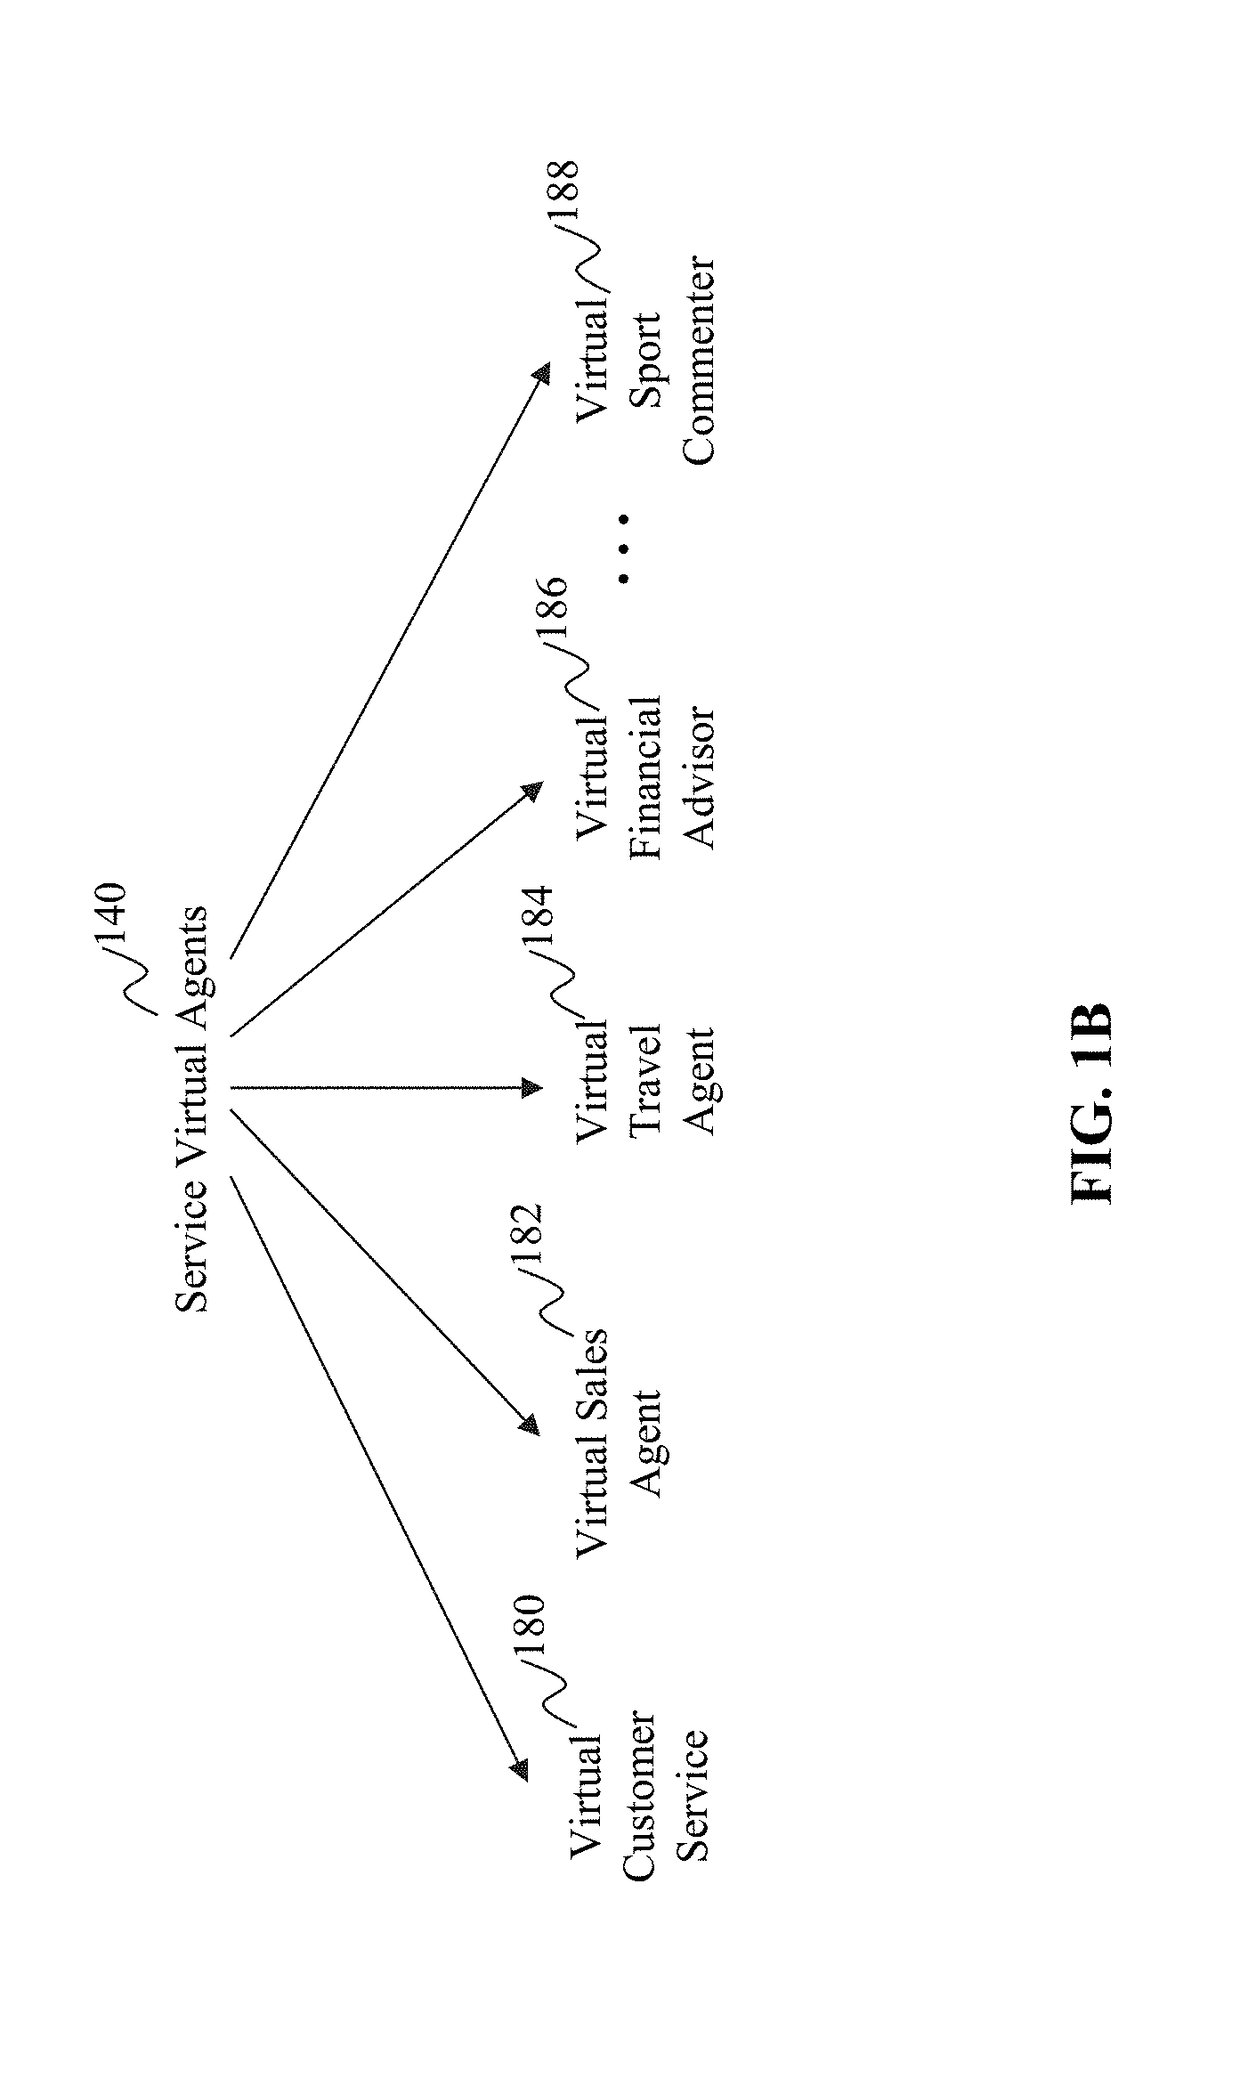 Method and system for semi-supervised learning in generating knowledge for intelligent virtual agents